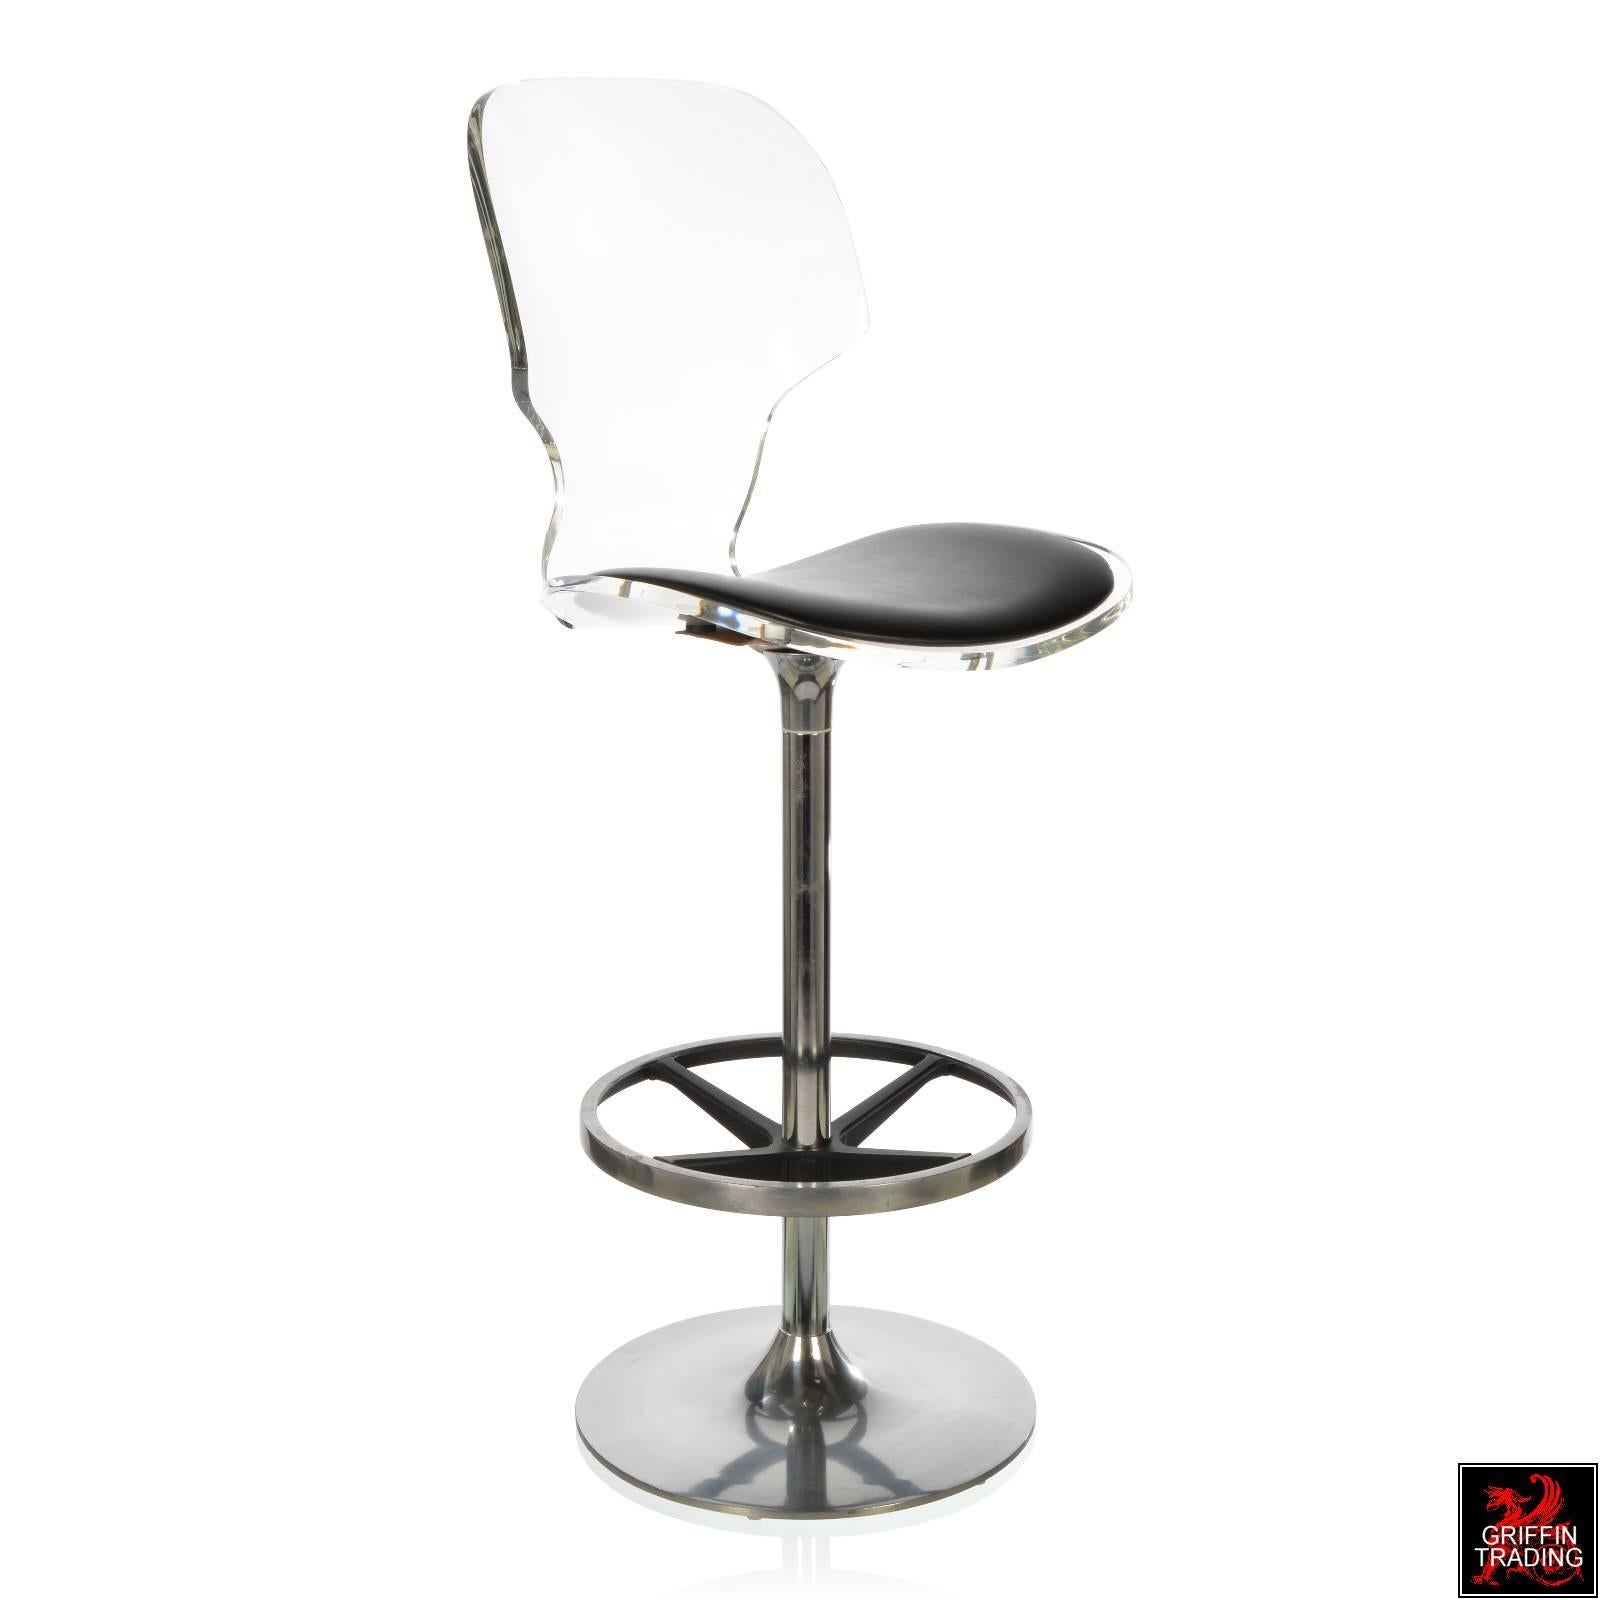 Pair of stylish acrylic bar stools with swivel black vinyl seats made by Creations At Dallas. These are very comfortable stools with shaped high backs made of crystal clear acrylic. Perfect for an unobstructed view across a room. The stools have a